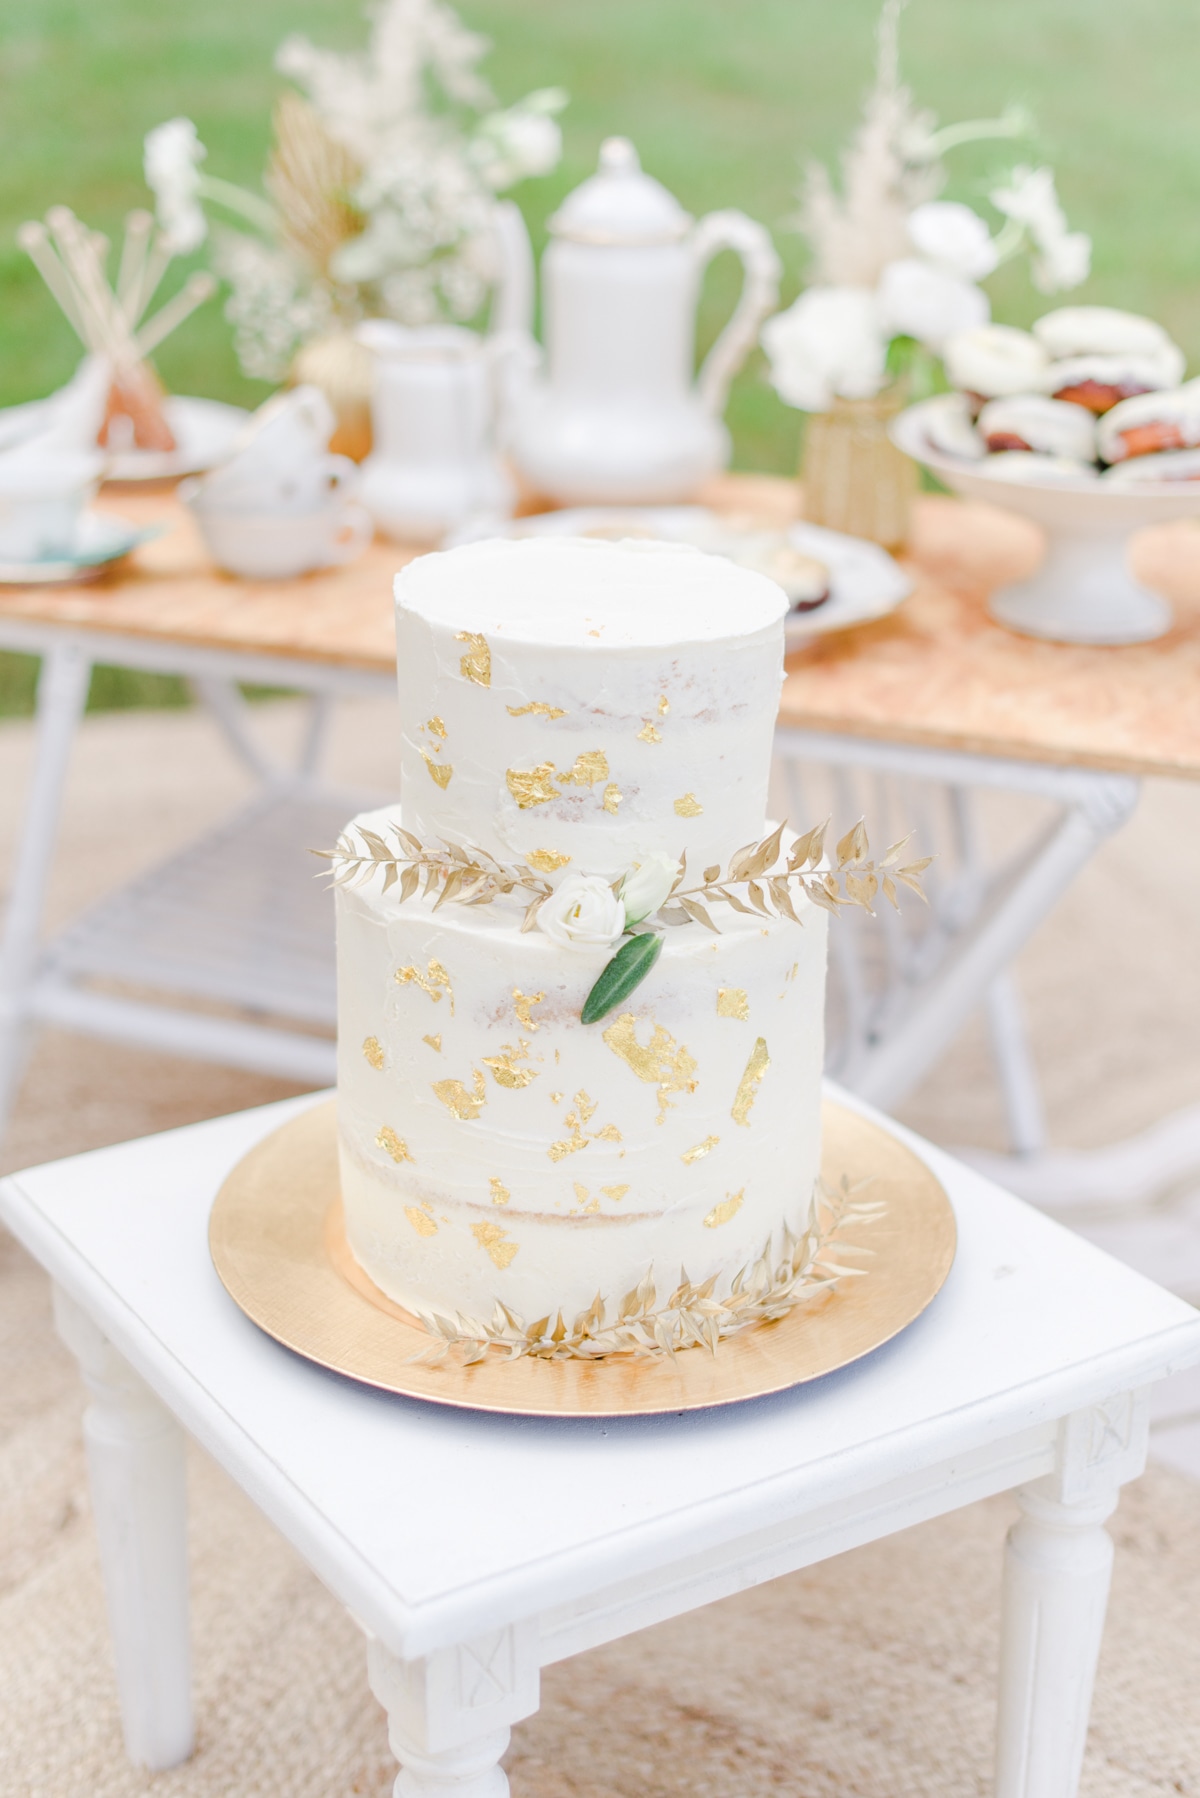 A French Castle Destination Wedding in White and Gold